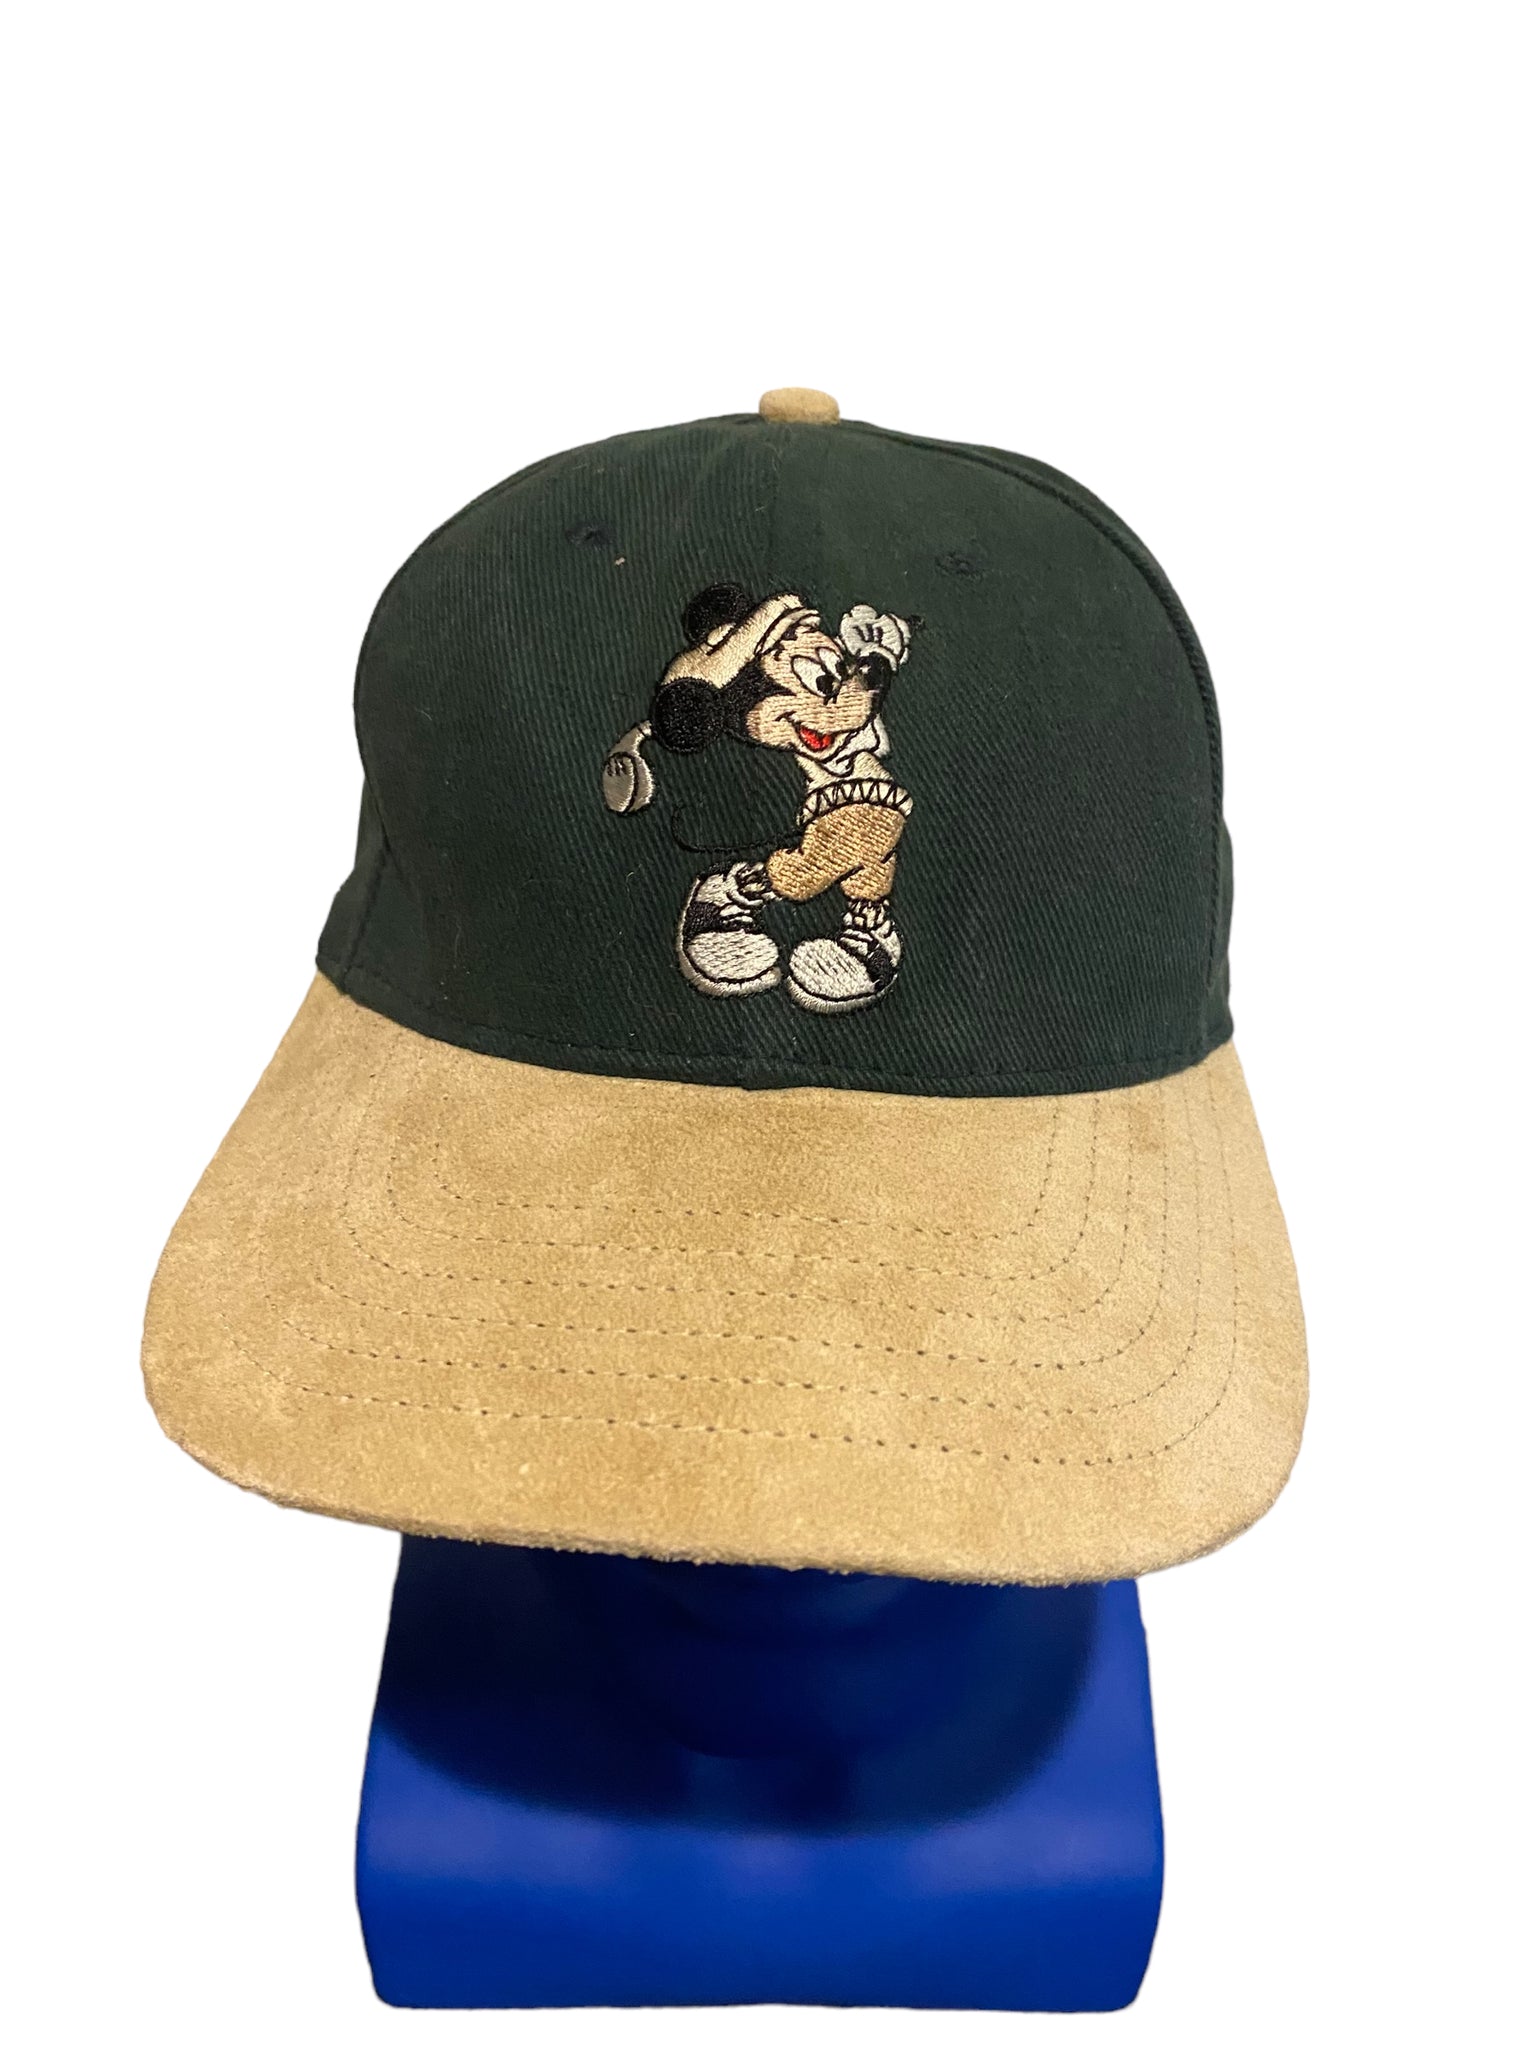 VTG Hat Disney Pro Collection Mickey Mouse Golf Leather Strapback Embroidered